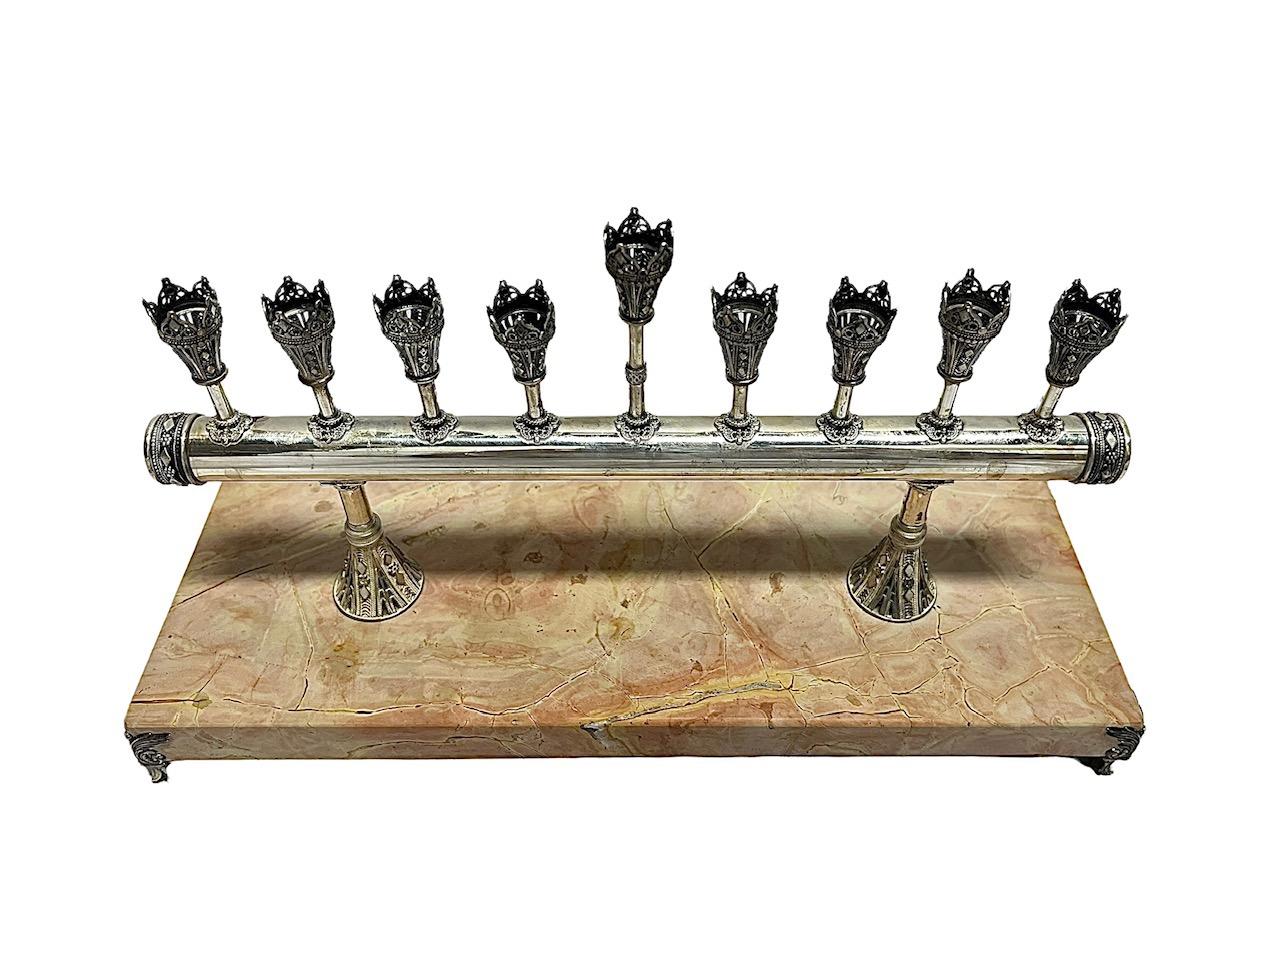 This sterling silver Menorah by the renowned artist Ben-Zion David Yemenite is a masterpiece of craftsmanship and spiritual significance. Meticulously crafted, this Menorah features intricate hand-filigree work that beautifully captures the essence